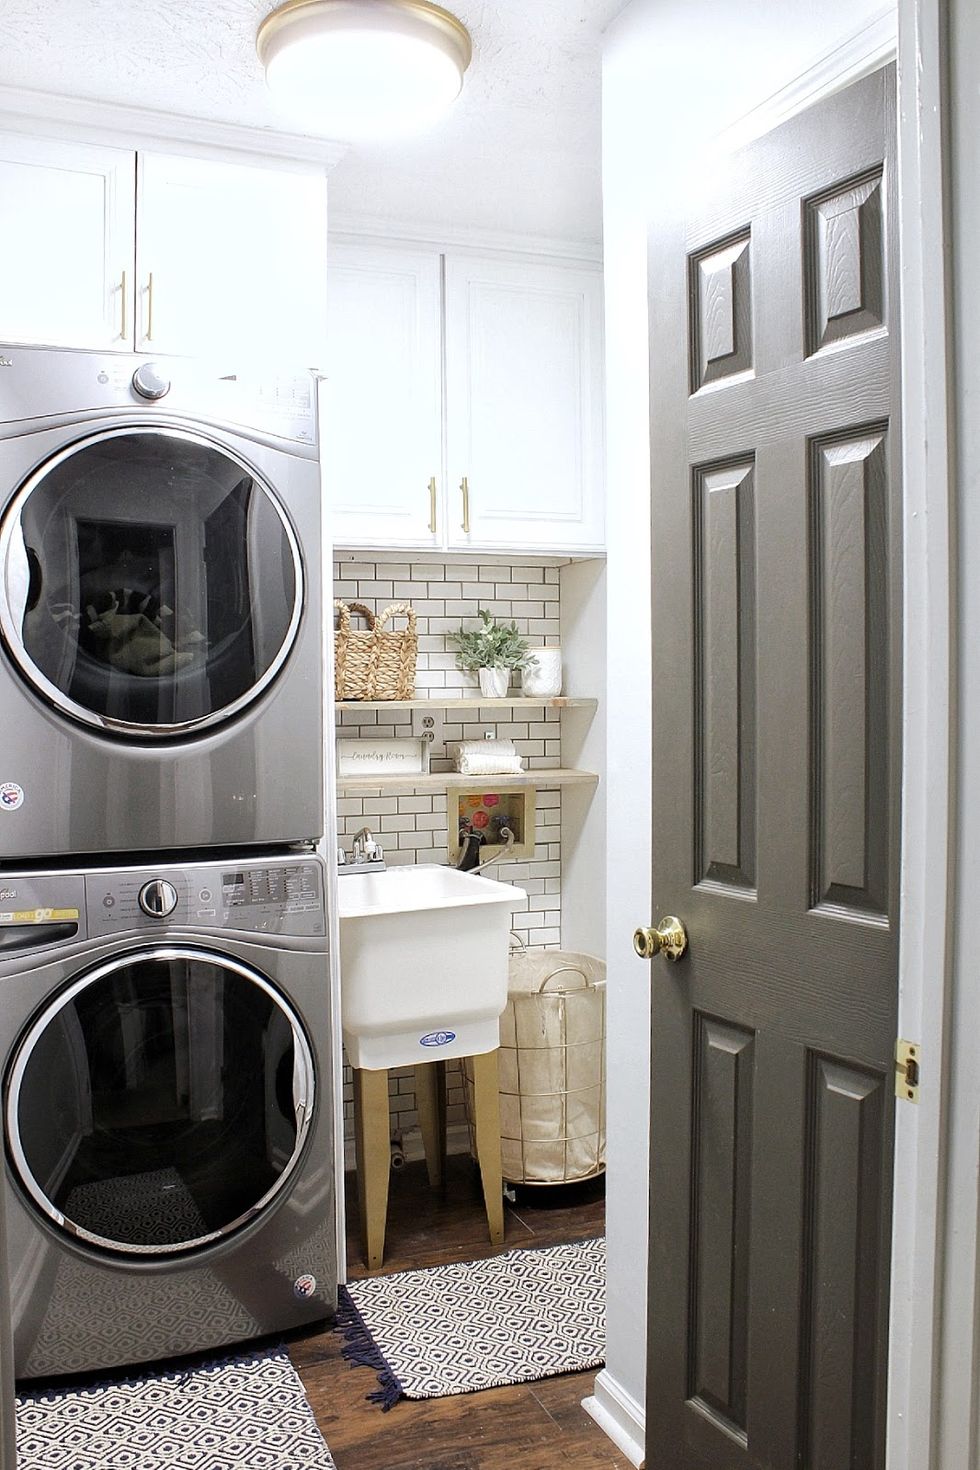 https://hips.hearstapps.com/hmg-prod/images/built-in-stacked-washer-dryer-laundry-room-1592414853.jpeg?crop=1xw:0.999375xh;center,top&resize=980:*